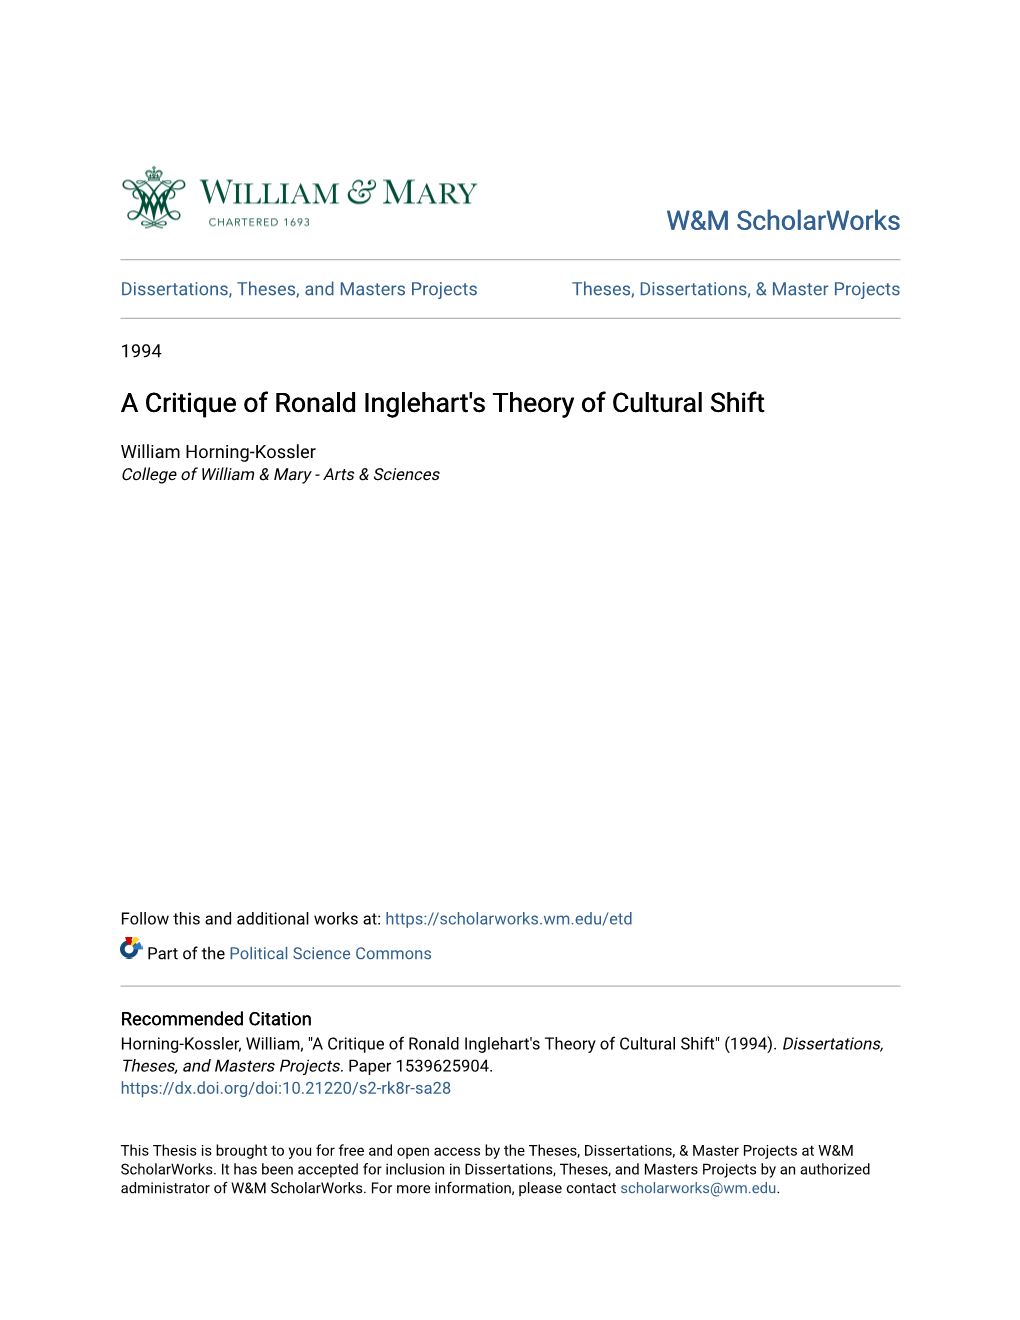 A Critique of Ronald Inglehart's Theory of Cultural Shift